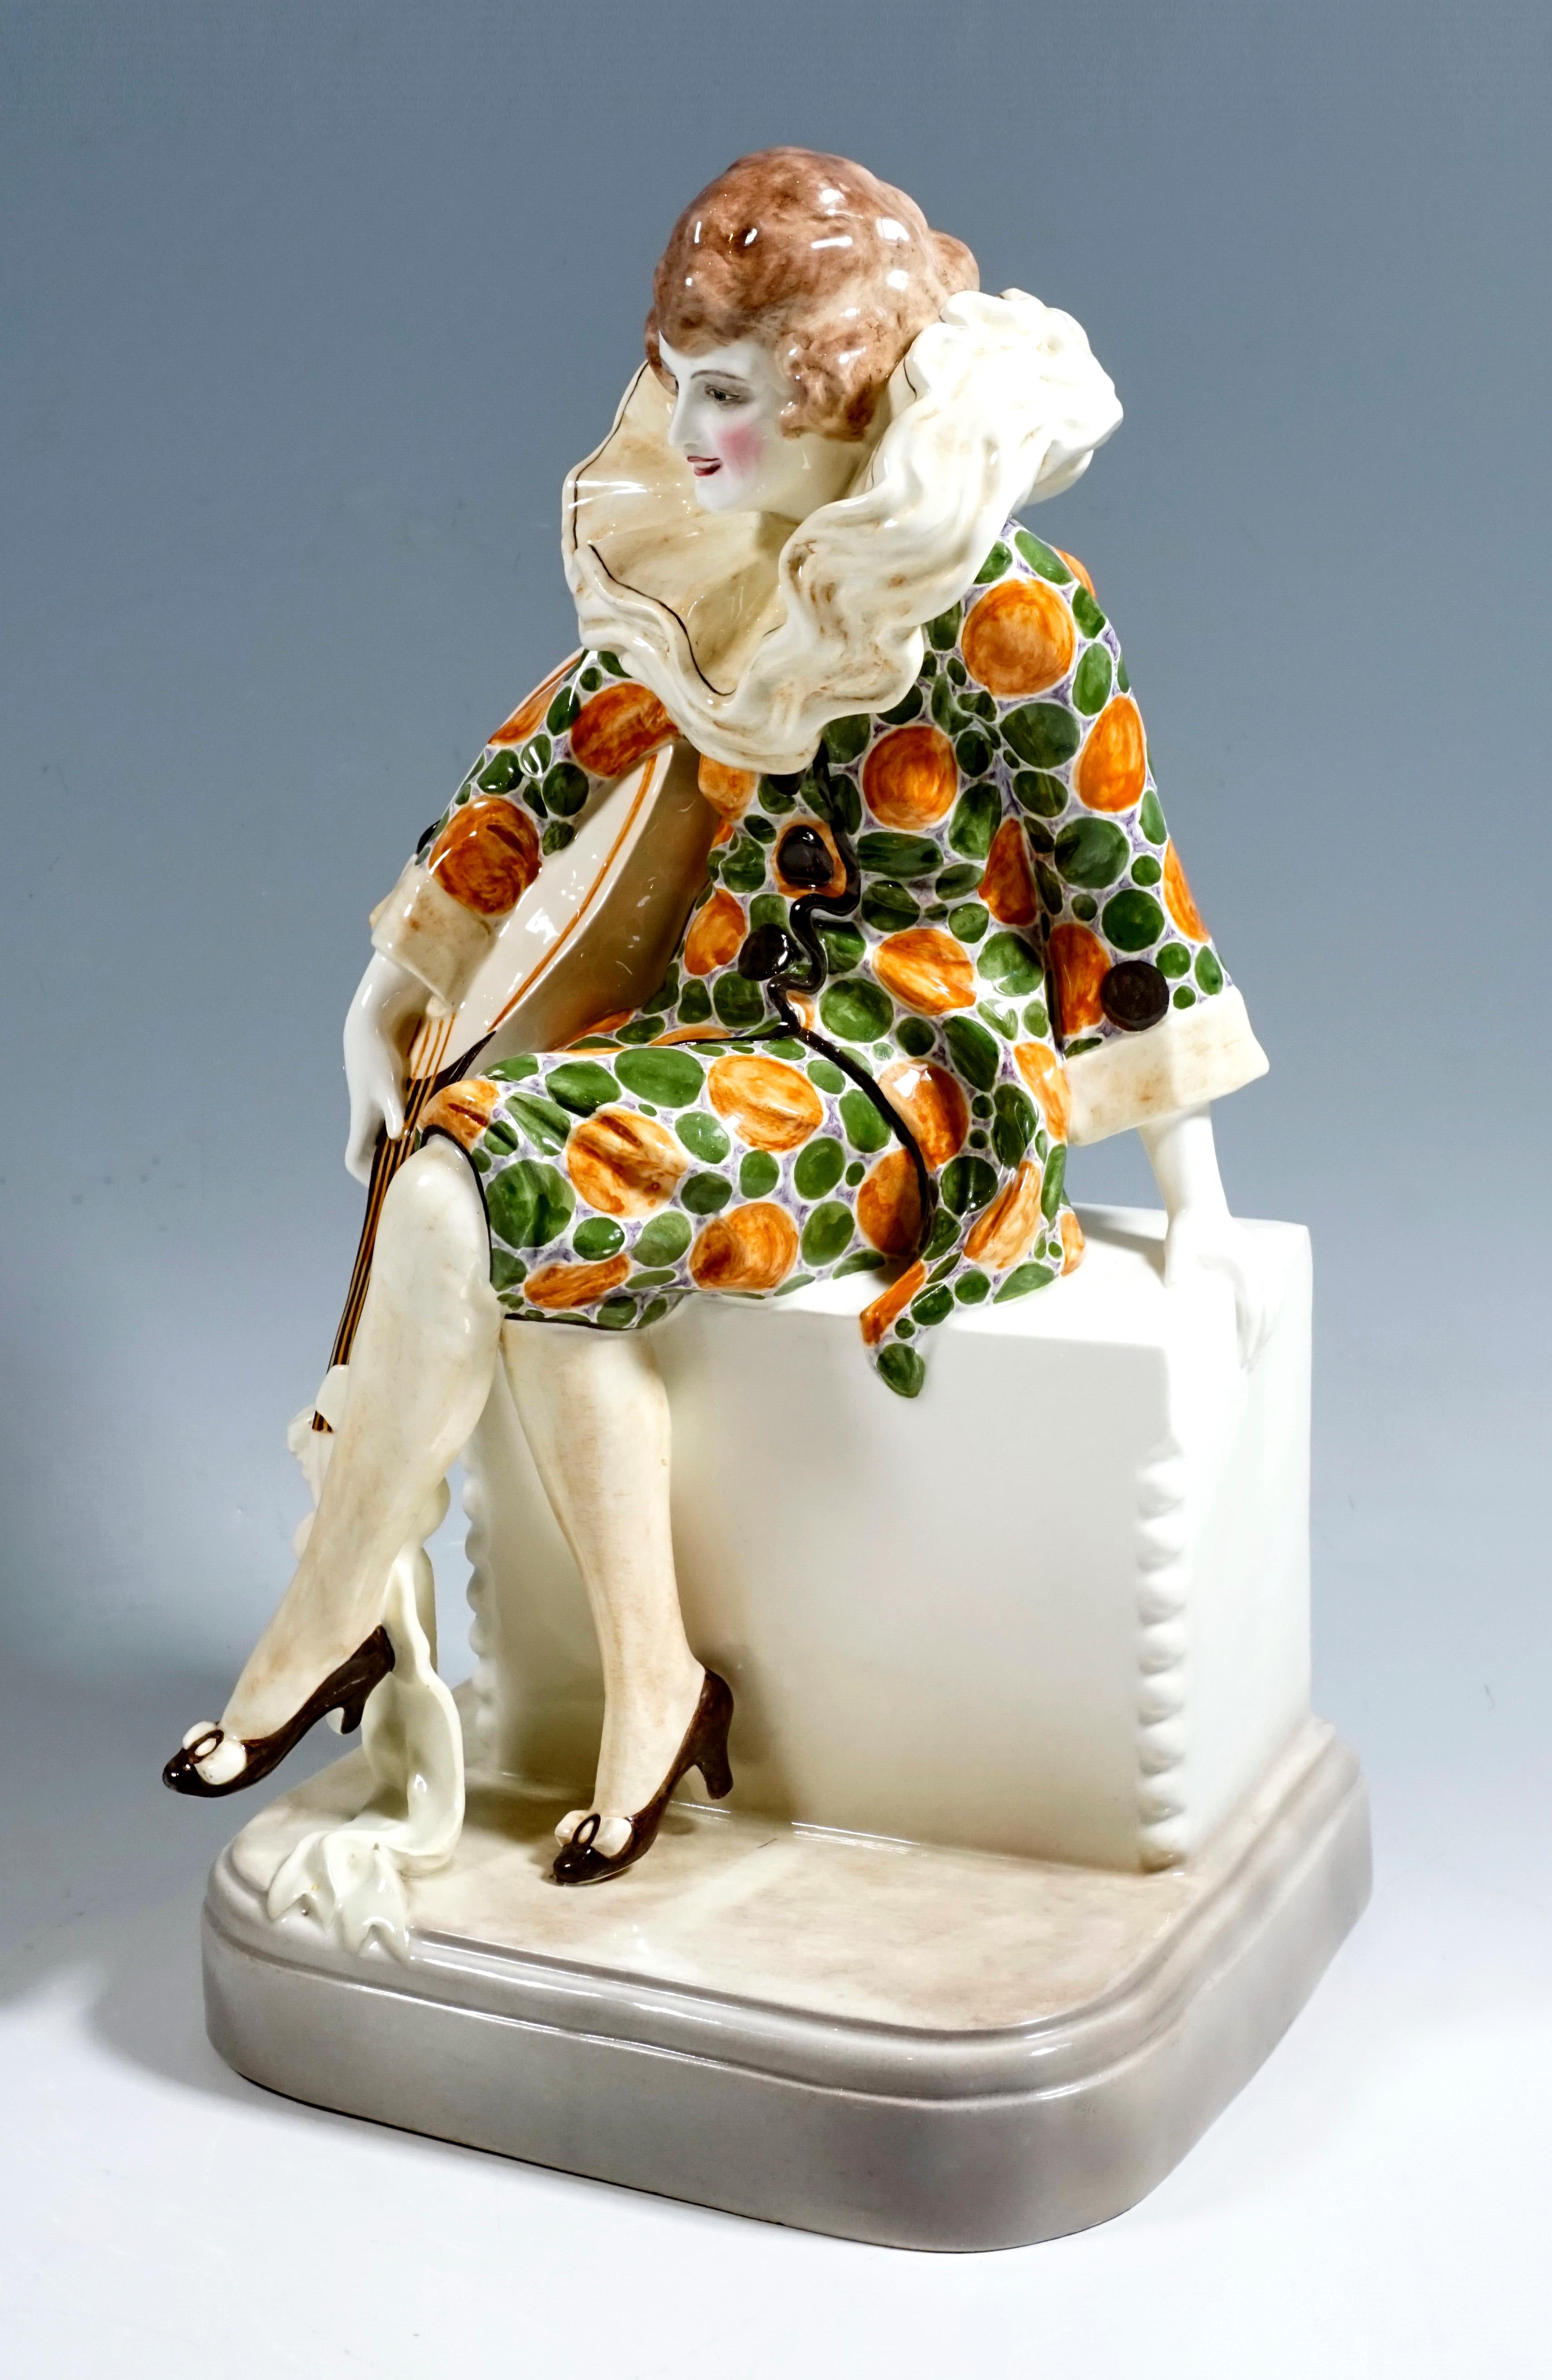 Rare Art Deco Goldscheider Ceramics Figurine
A young musician is depicted who, dressed as Pierrette, sits on a pedestal with her lute. Her wide costume with knee-length harem pants and a particularly large beige-colored ruff is densely decorated